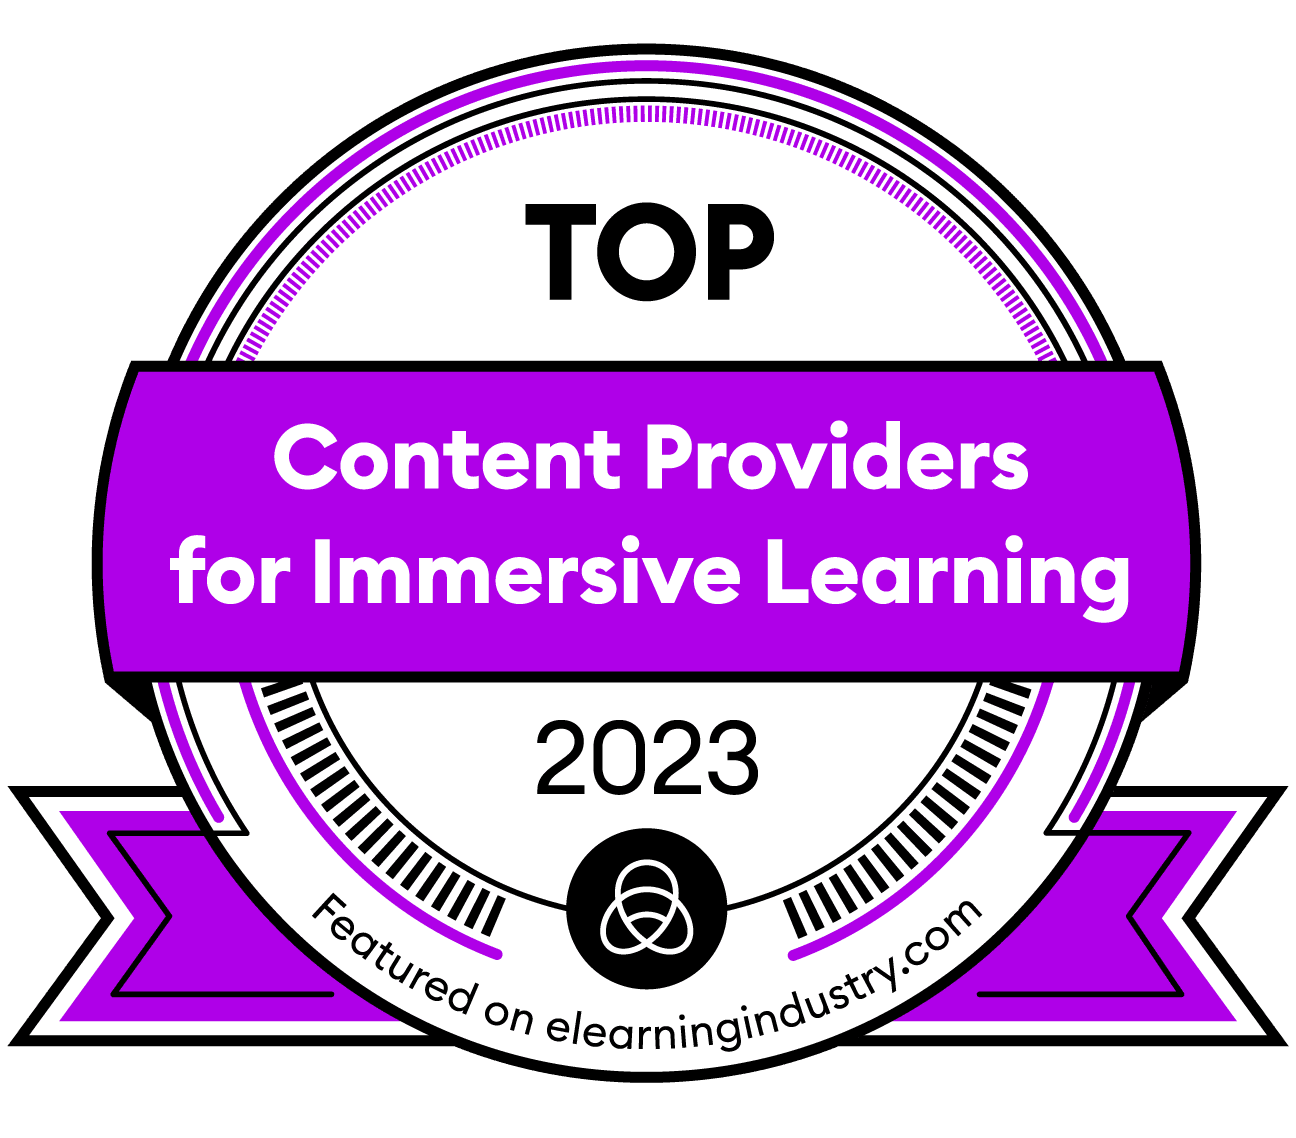 Tesseract Learning is a Top Content Provider for Immersive Learning 2023